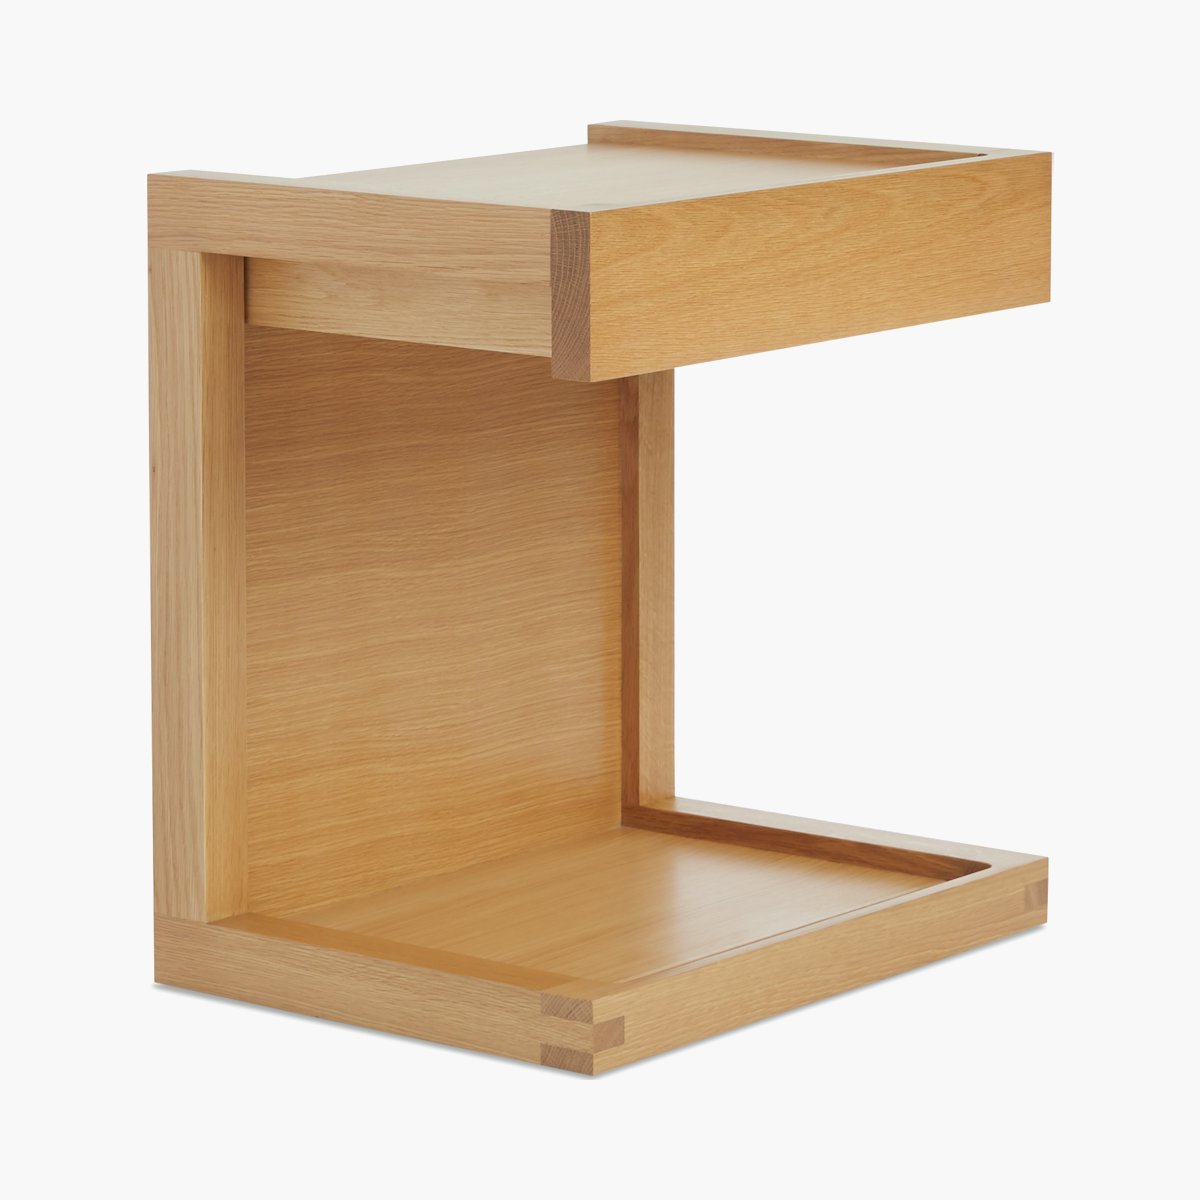 Matera Bedside Table